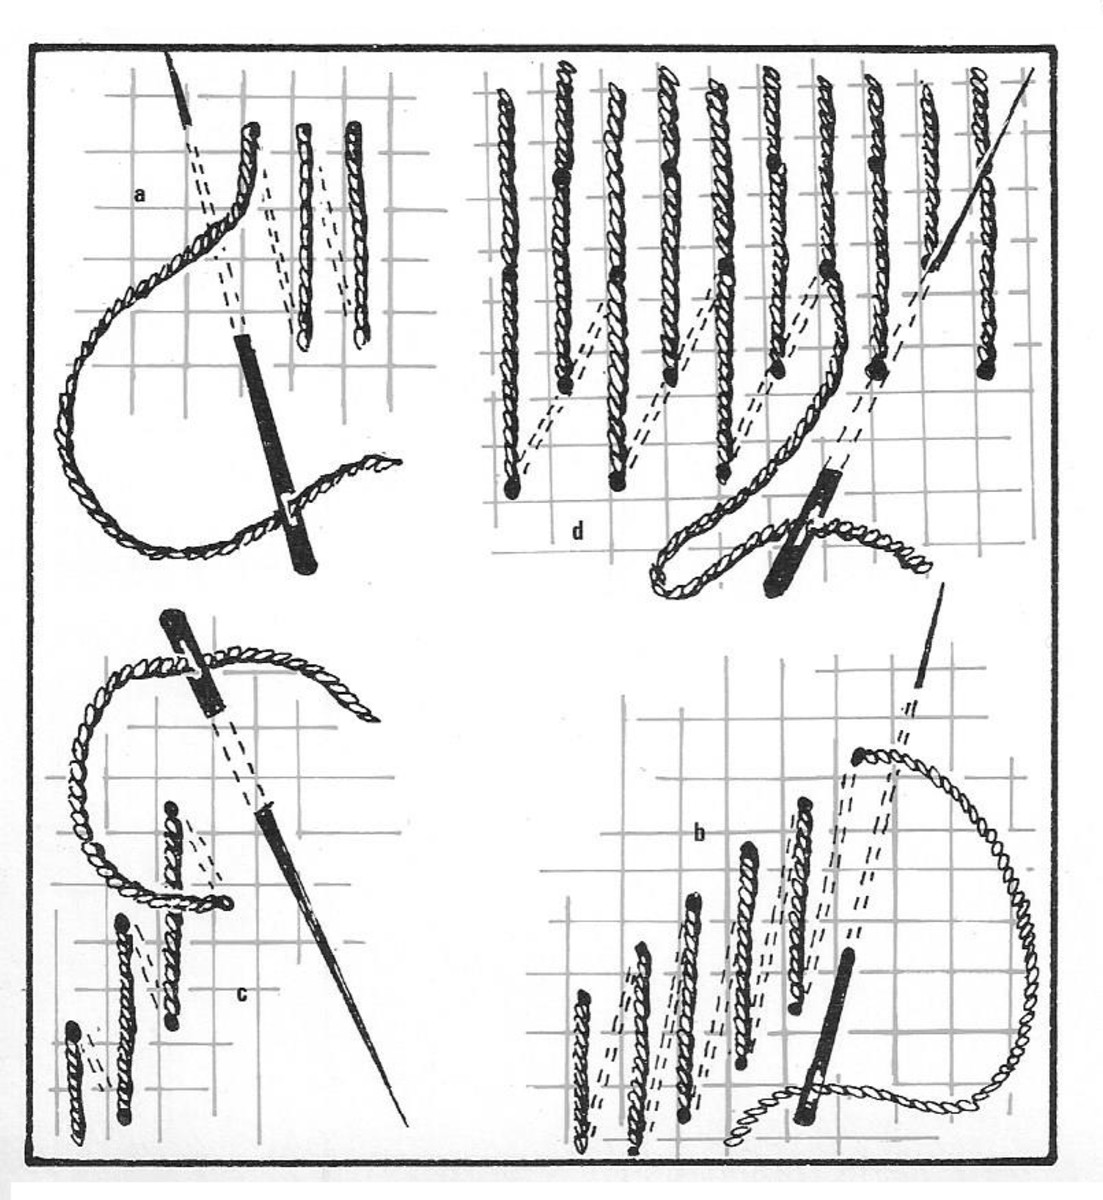 Figure 1 - Four stitch formations used in Bargello.